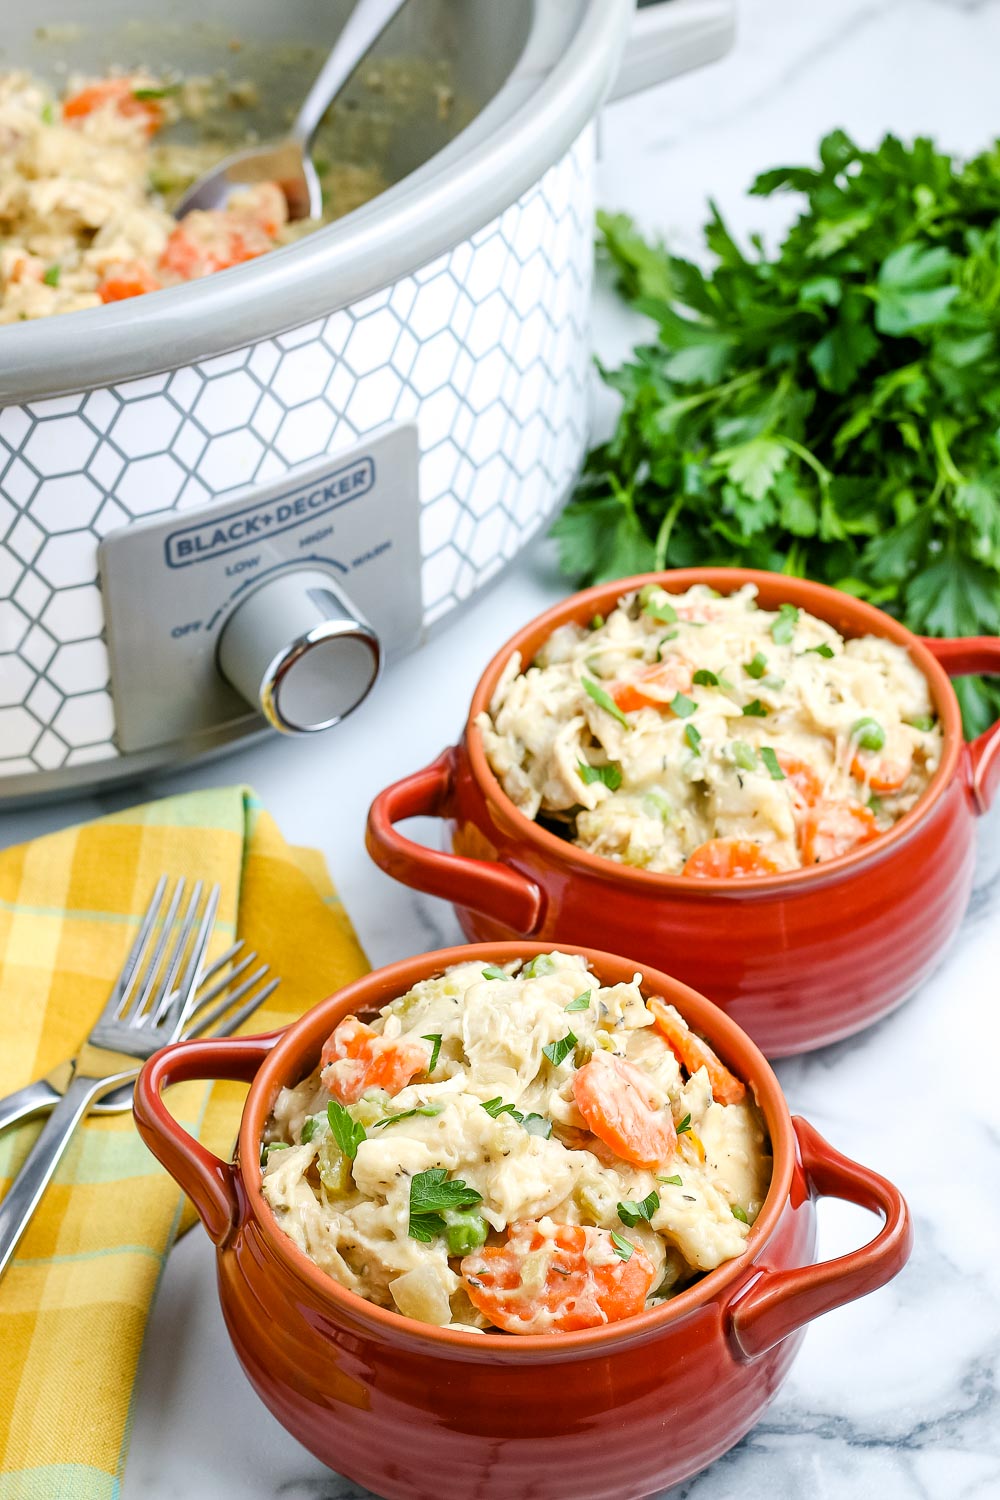 Two bowls full of this Crockpot Chicken and Dumplings recipe.